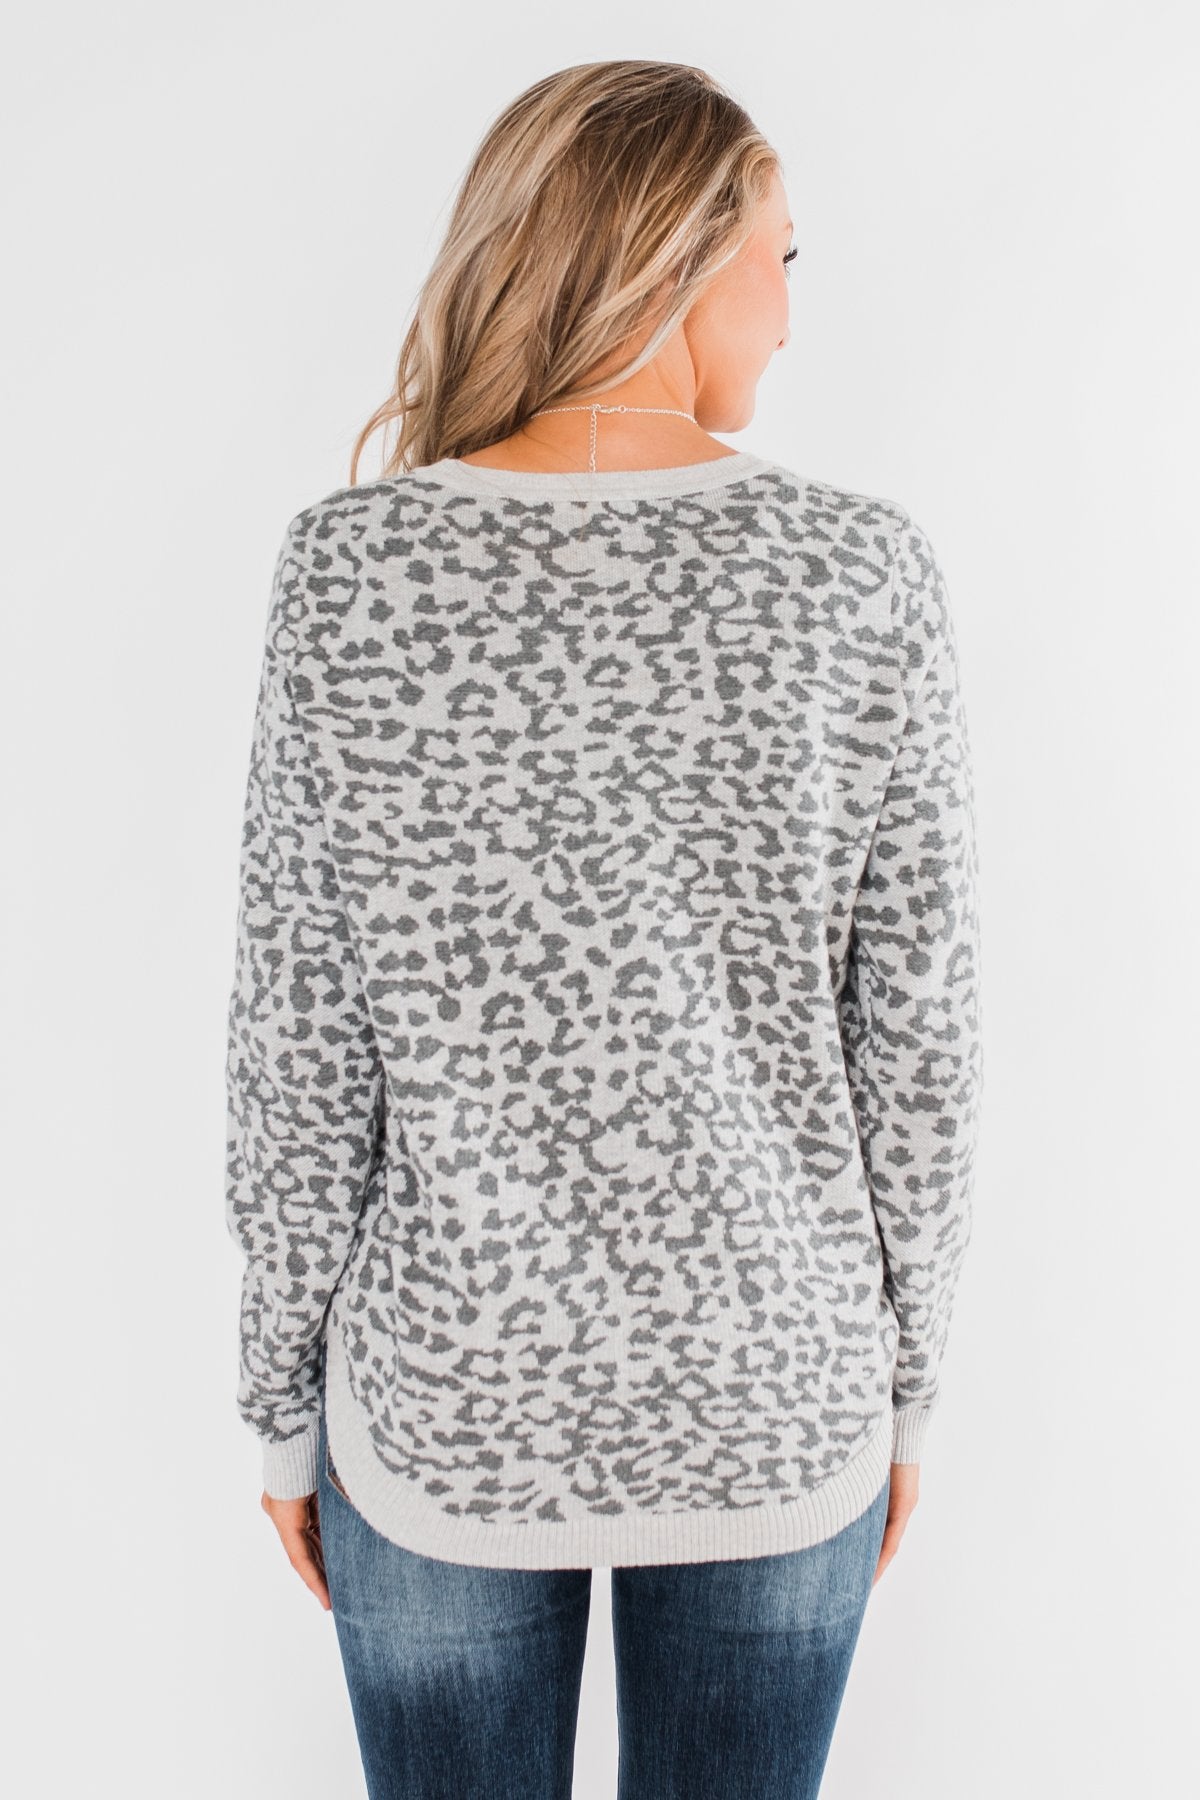 Naturally Fierce Leopard Sweater- Heather Grey – The Pulse Boutique